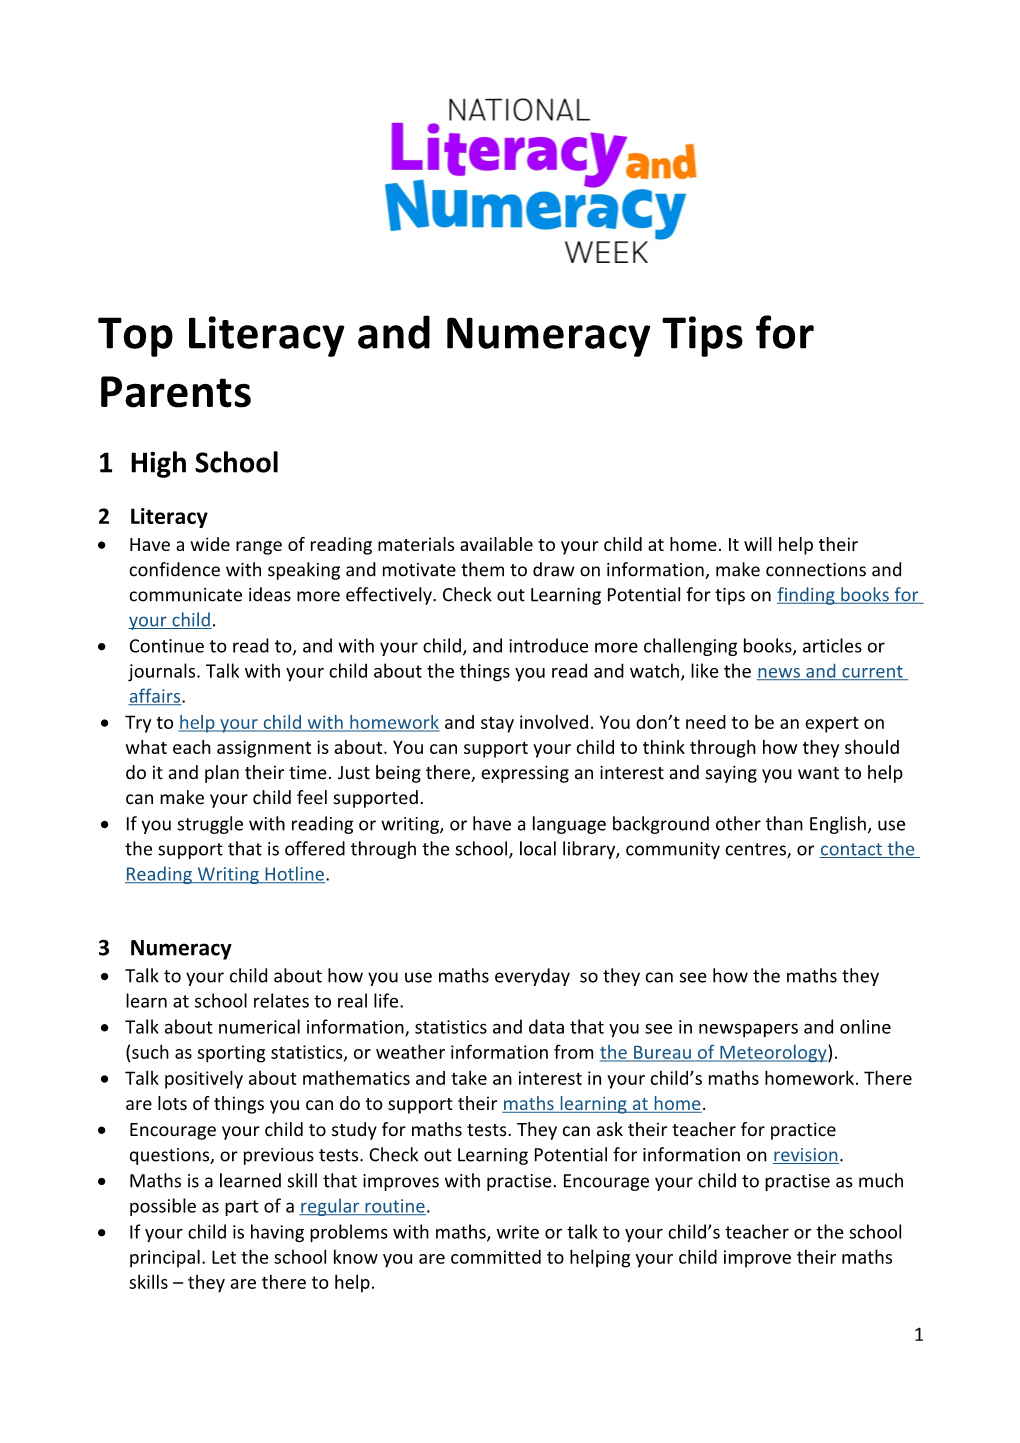 Top Literacy and Numeracy Tips for Parents